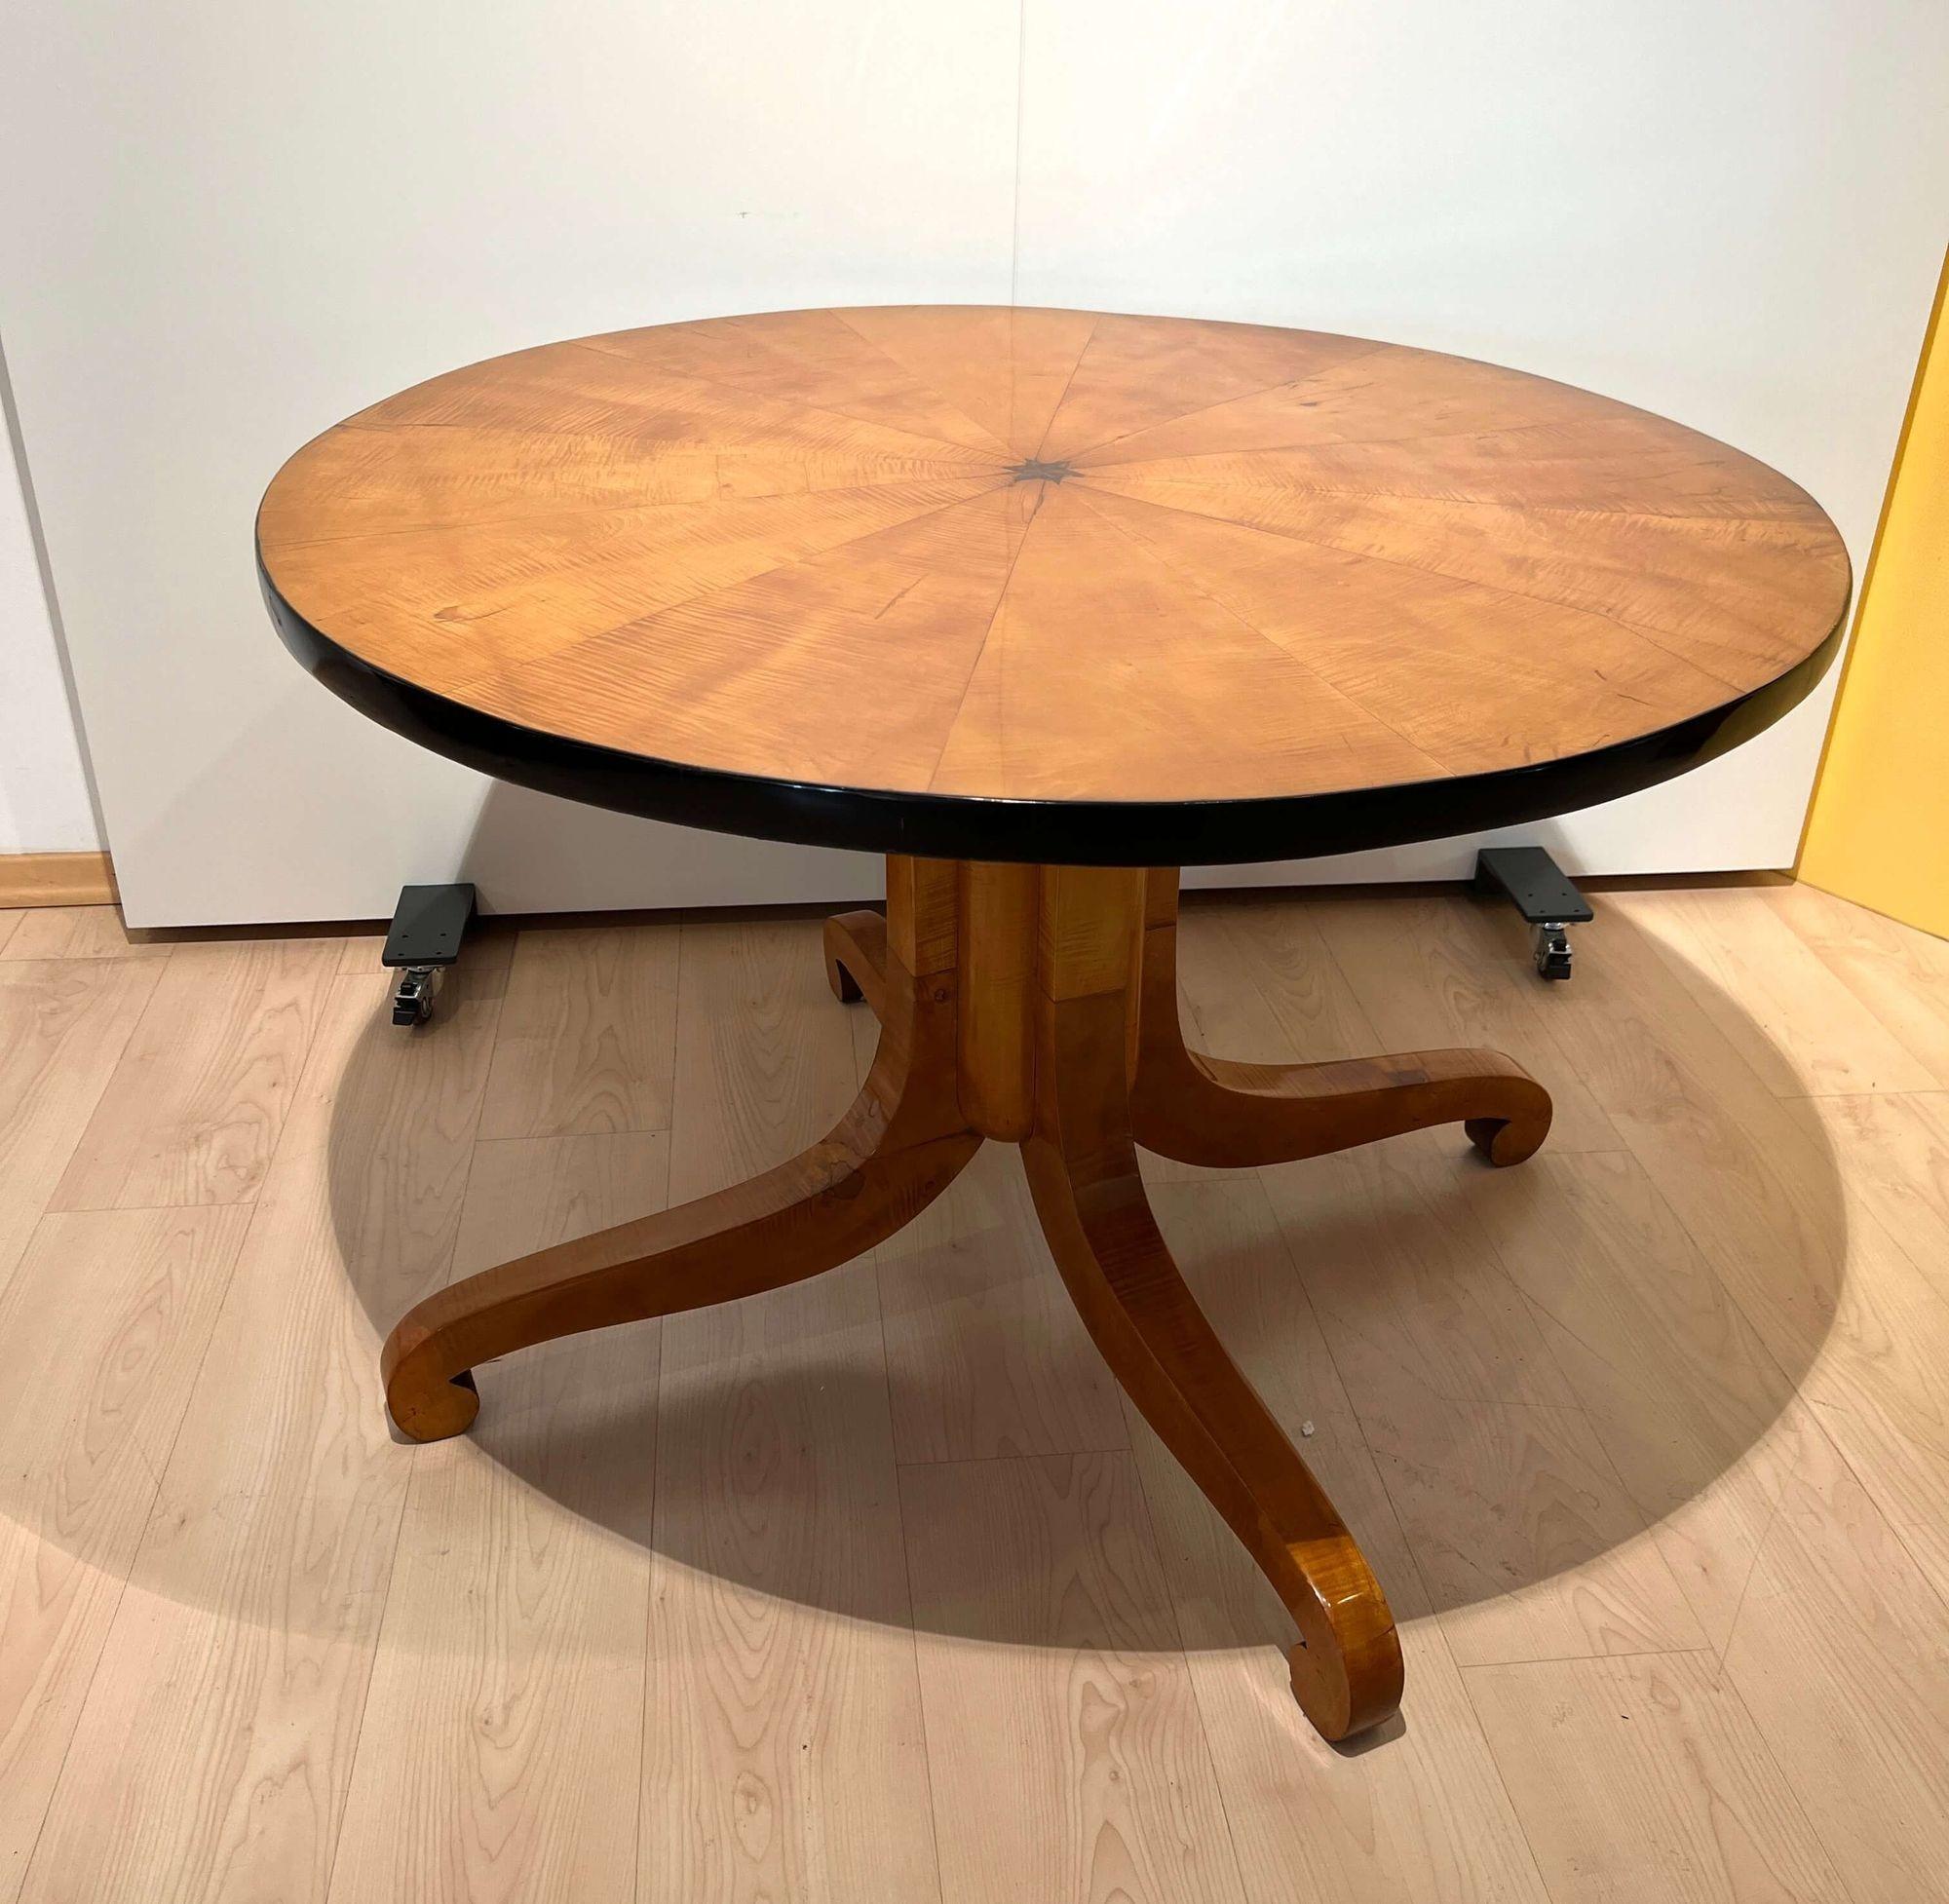 Beautiful Biedermeier Salon or dining table in Maple with Star inlay from South Germany, Munich about 1830.
 
Provenance: Munich, attributed to household of Justus von Liebig (1803-1873), german chemist. 
 
Bright maple star-shaped veneered on